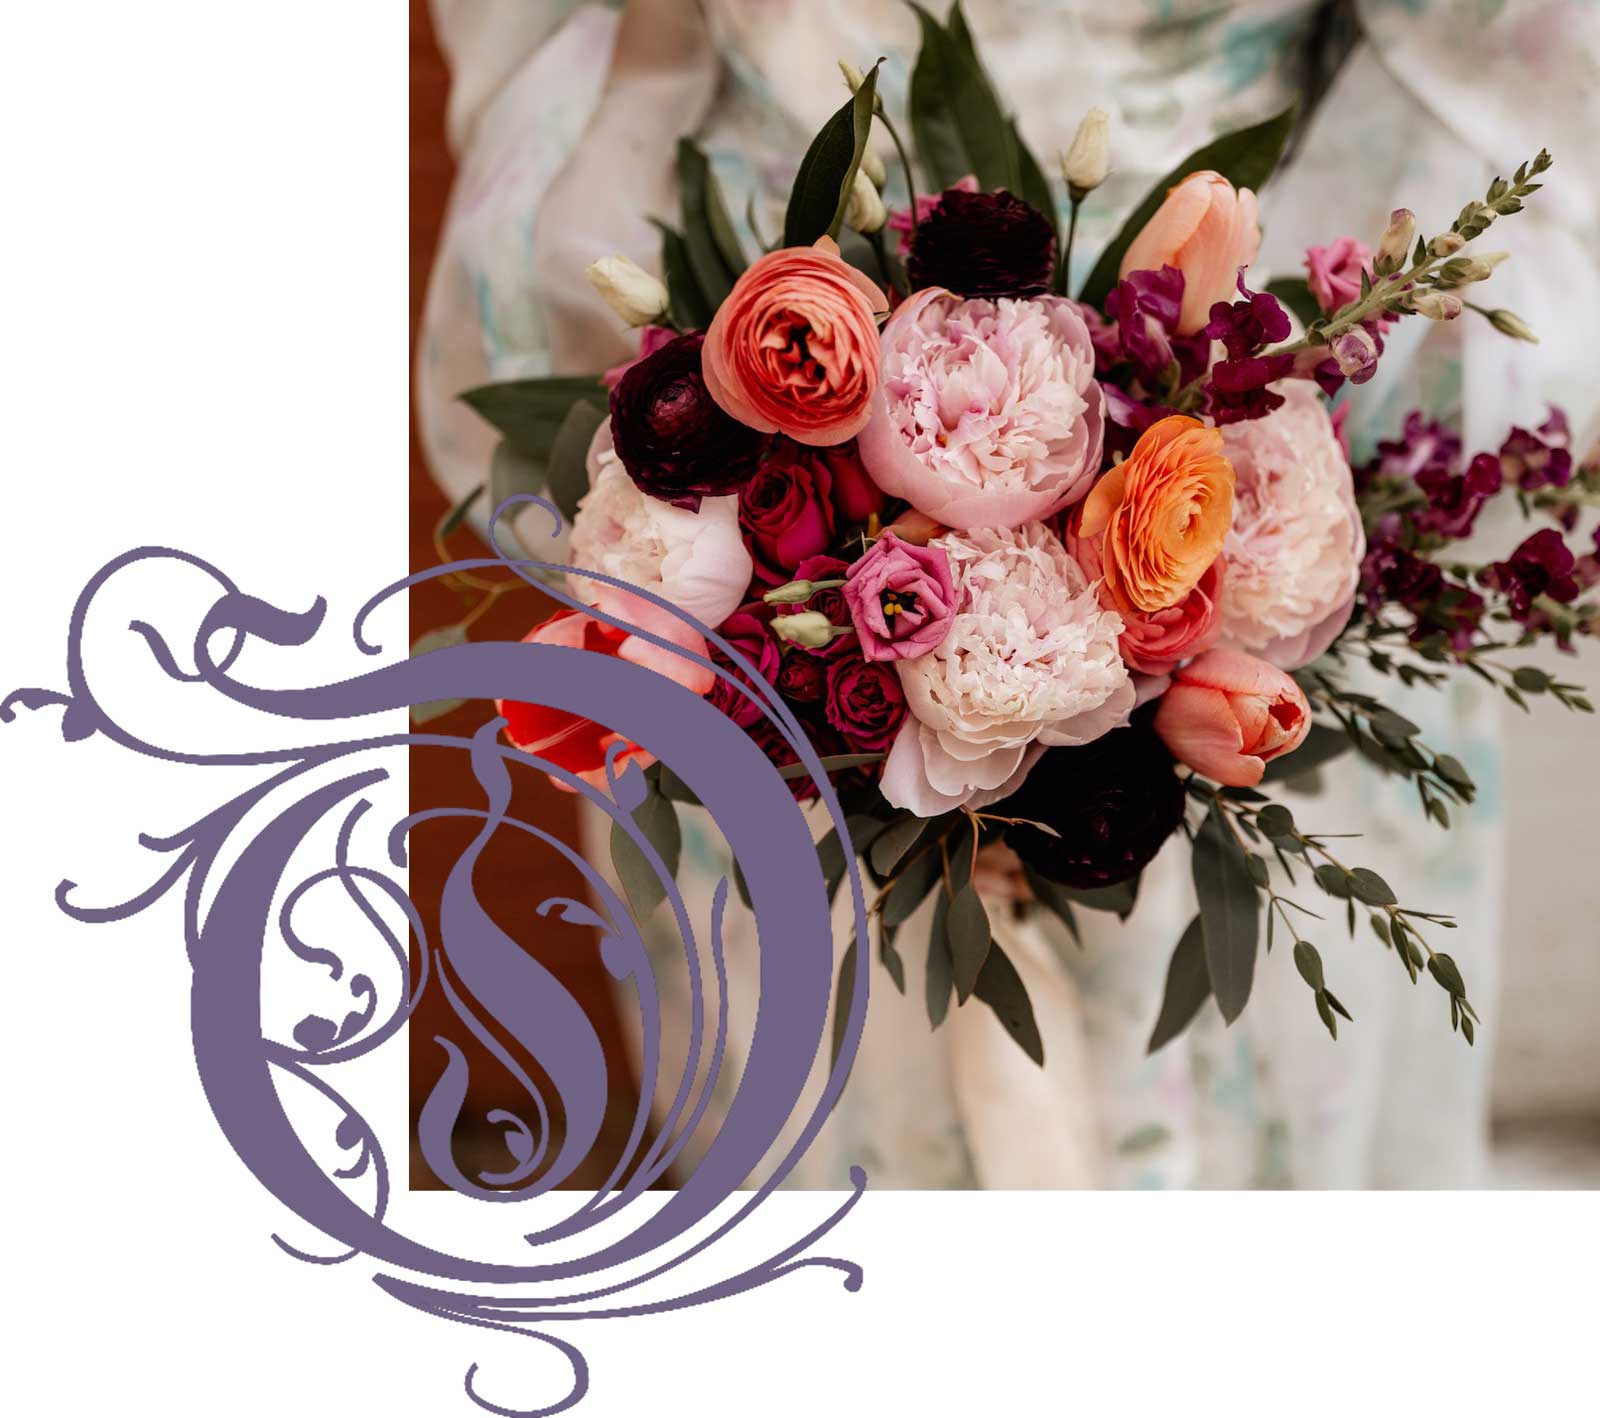 event planning & design in maryland,event planner in maryland,wedding planner in maryland,party planner in maryland,event planner in md,event planning maryland